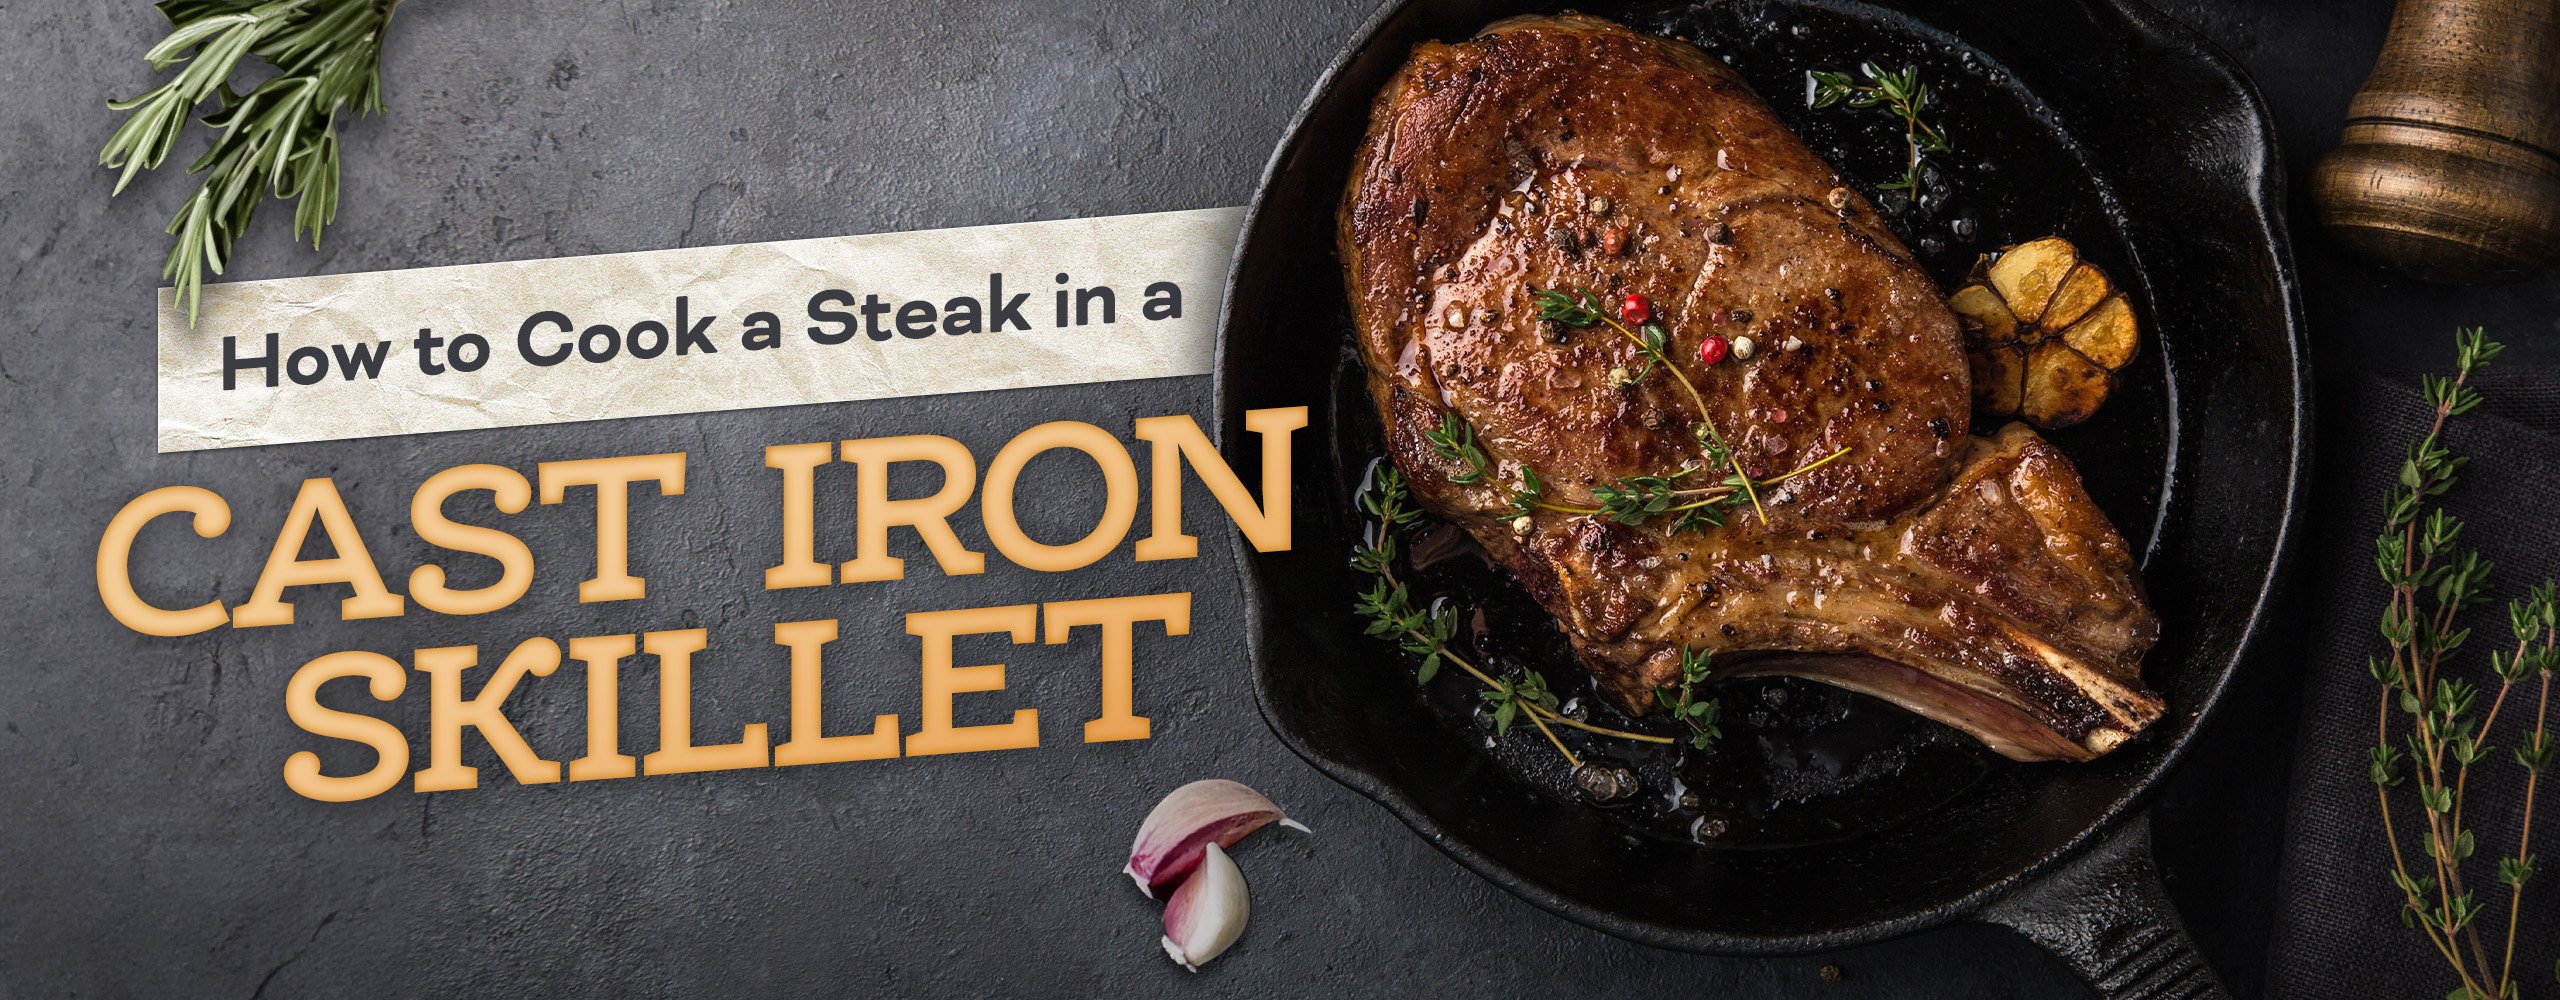 How to Cook Steak in a Cast Iron Skillet 